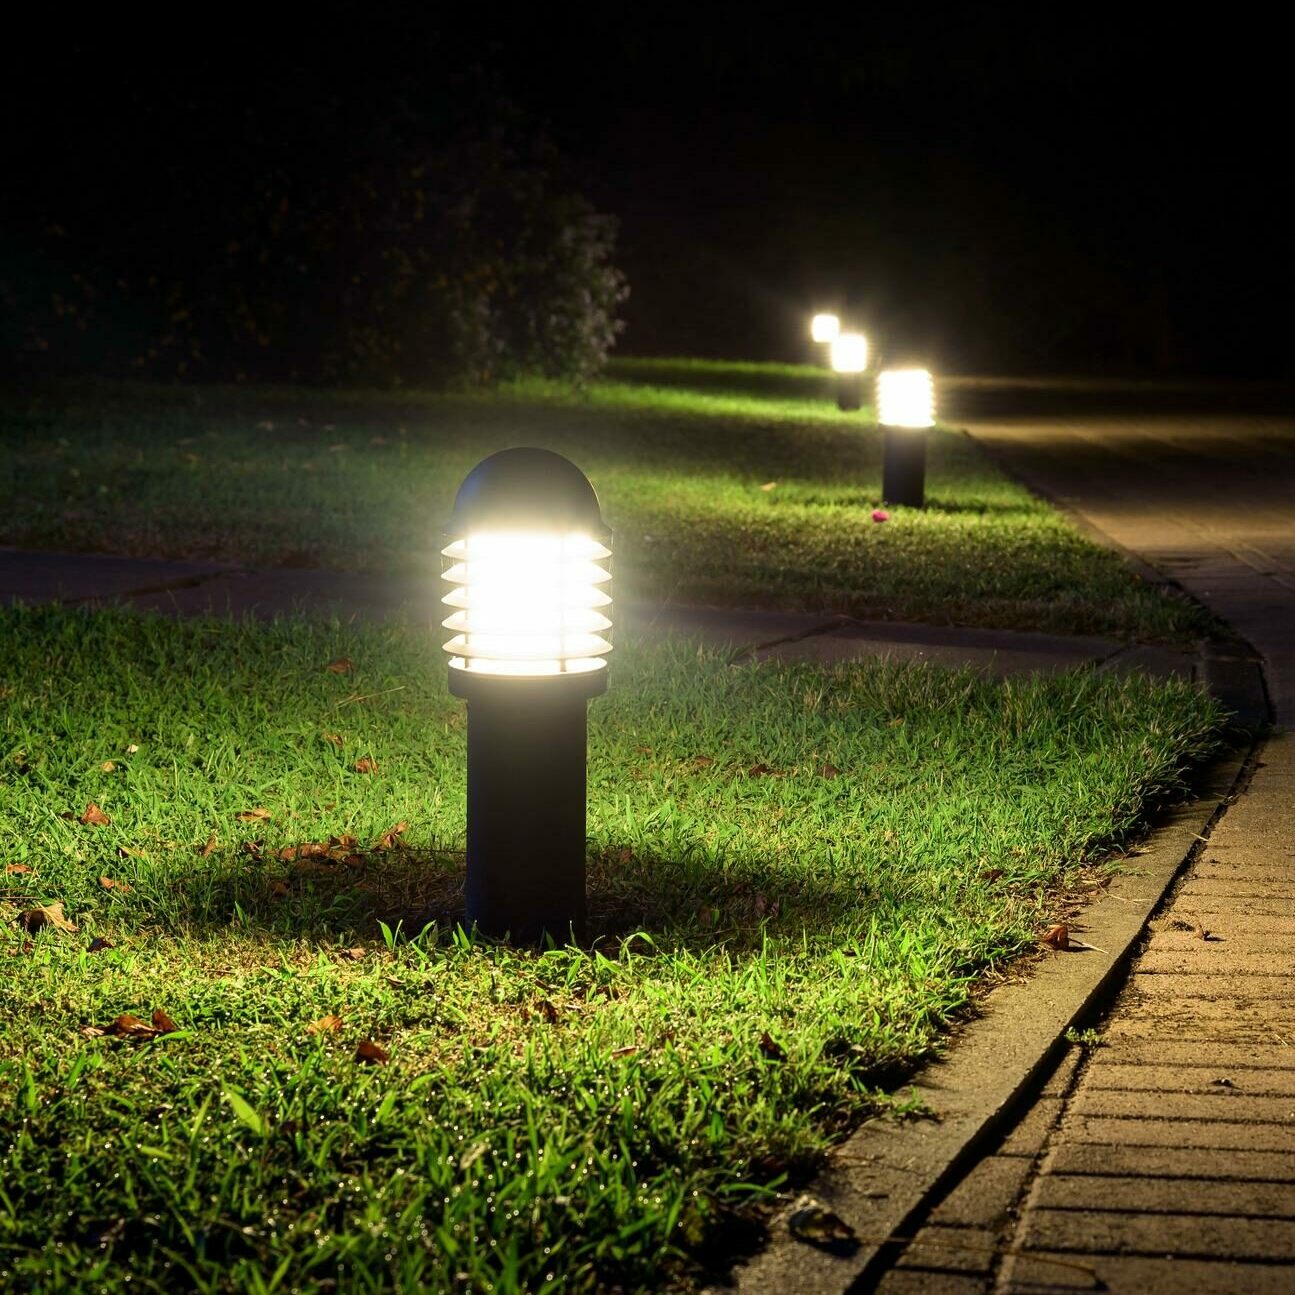 LED light posts line the garden path in the backyard, providing a stylish and well-lit passage.